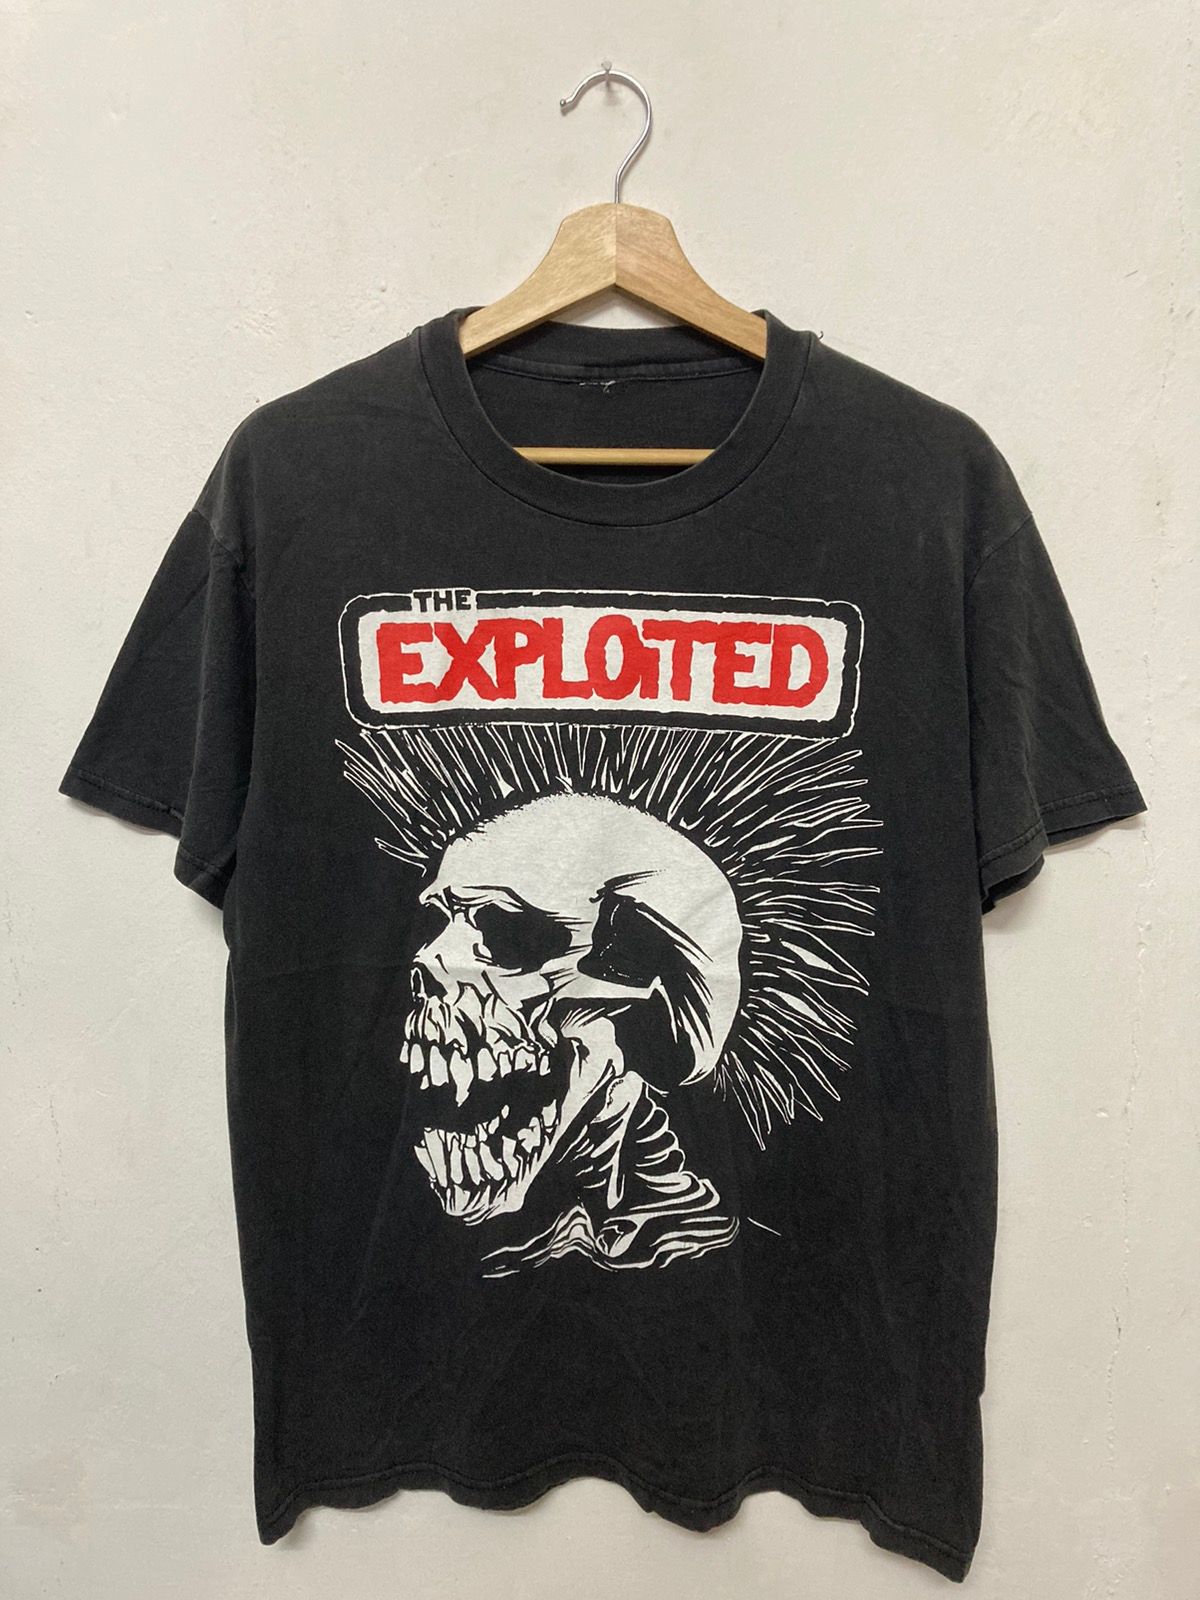 Rock Band ❗️LAST DROP BEFORE DELETE❗️The Exploited Punk Rock Band Tee Size US M / EU 48-50 / 2 - 1 Preview